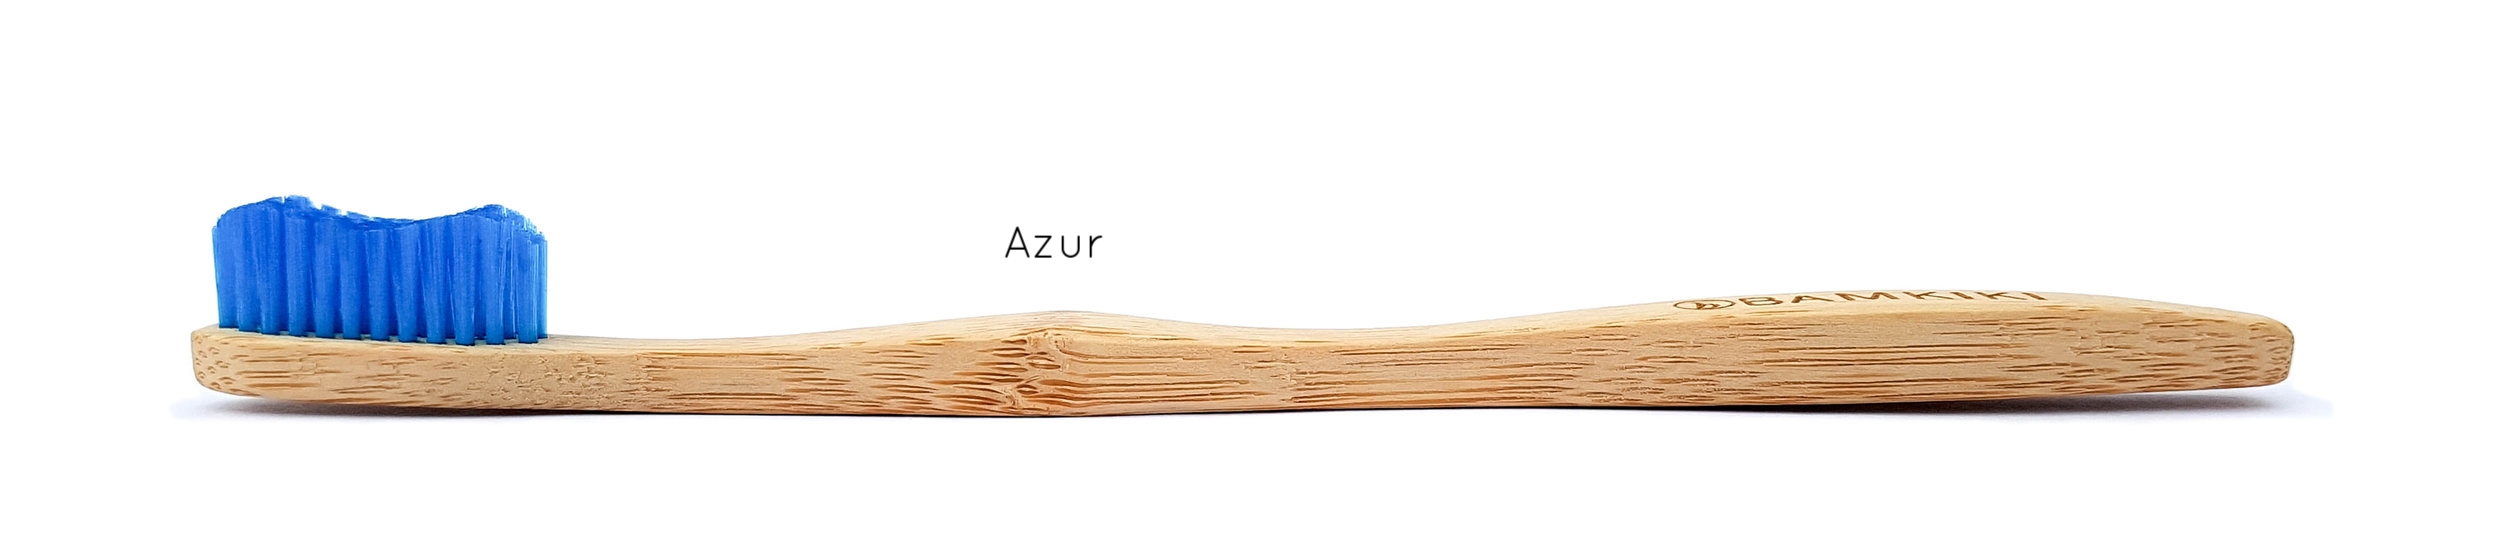 Adult Size Biodegradable Bamboo Toothbrush Flat Azur